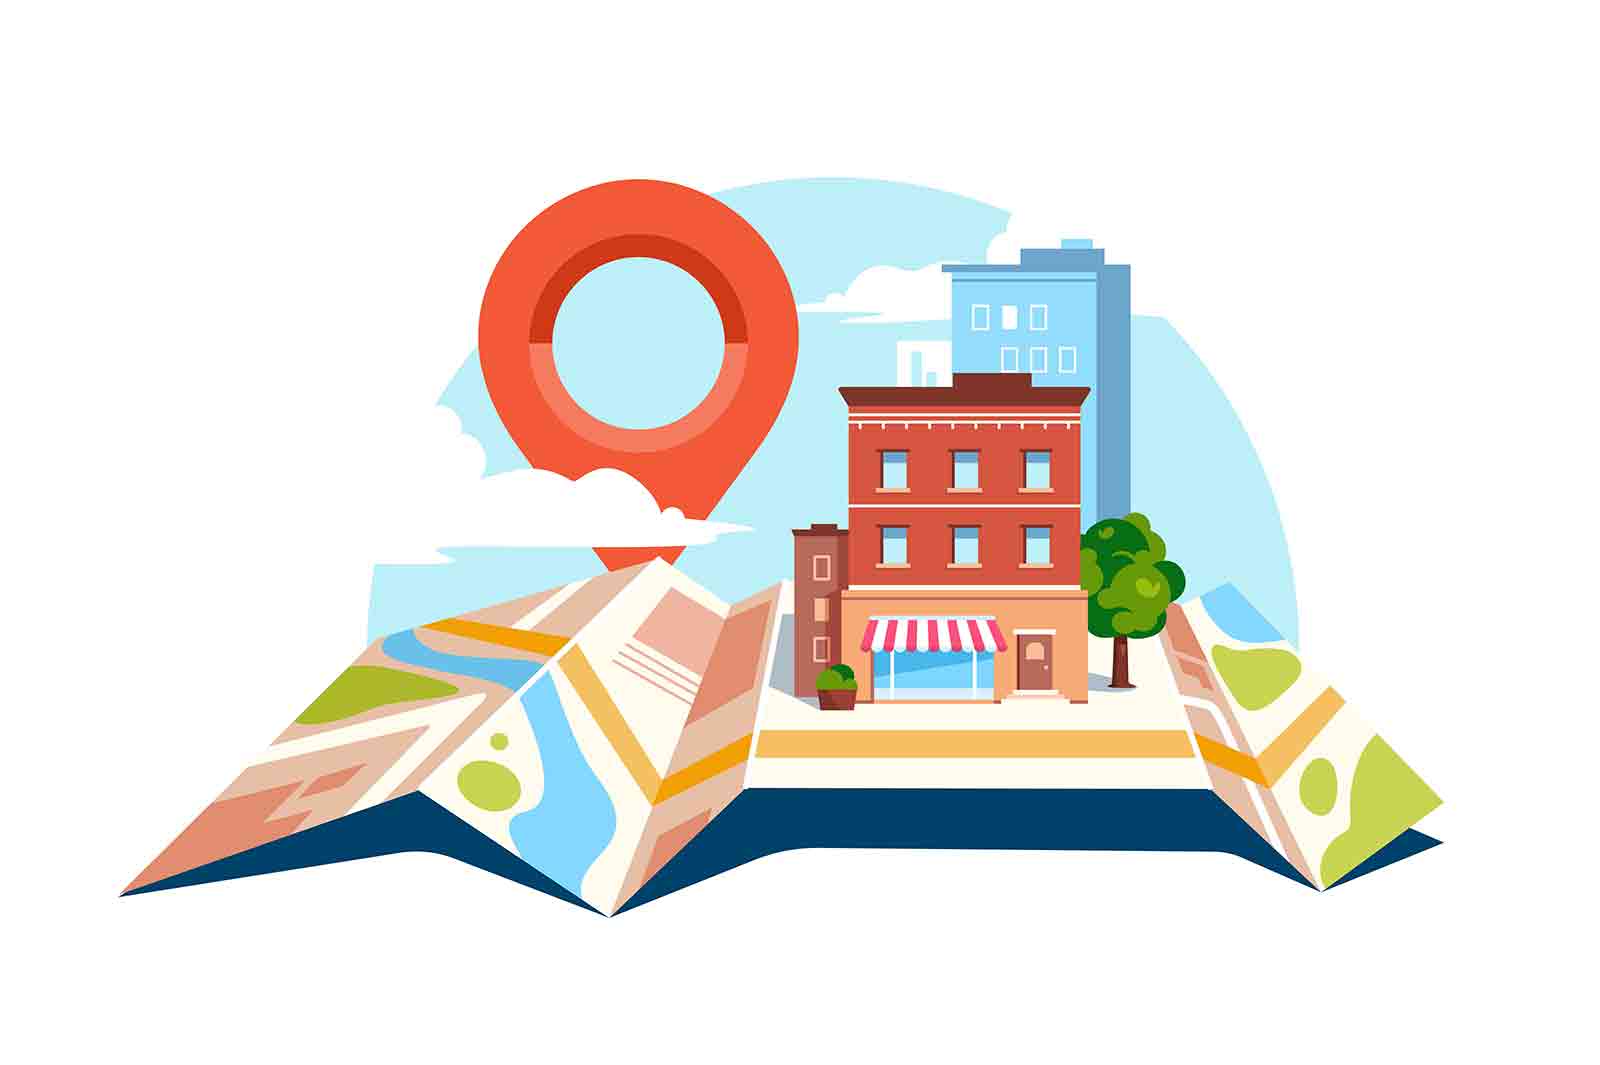 Geolocation city map and gps navigation system vector illustration. Location pin, store and buildings on city map flat style design